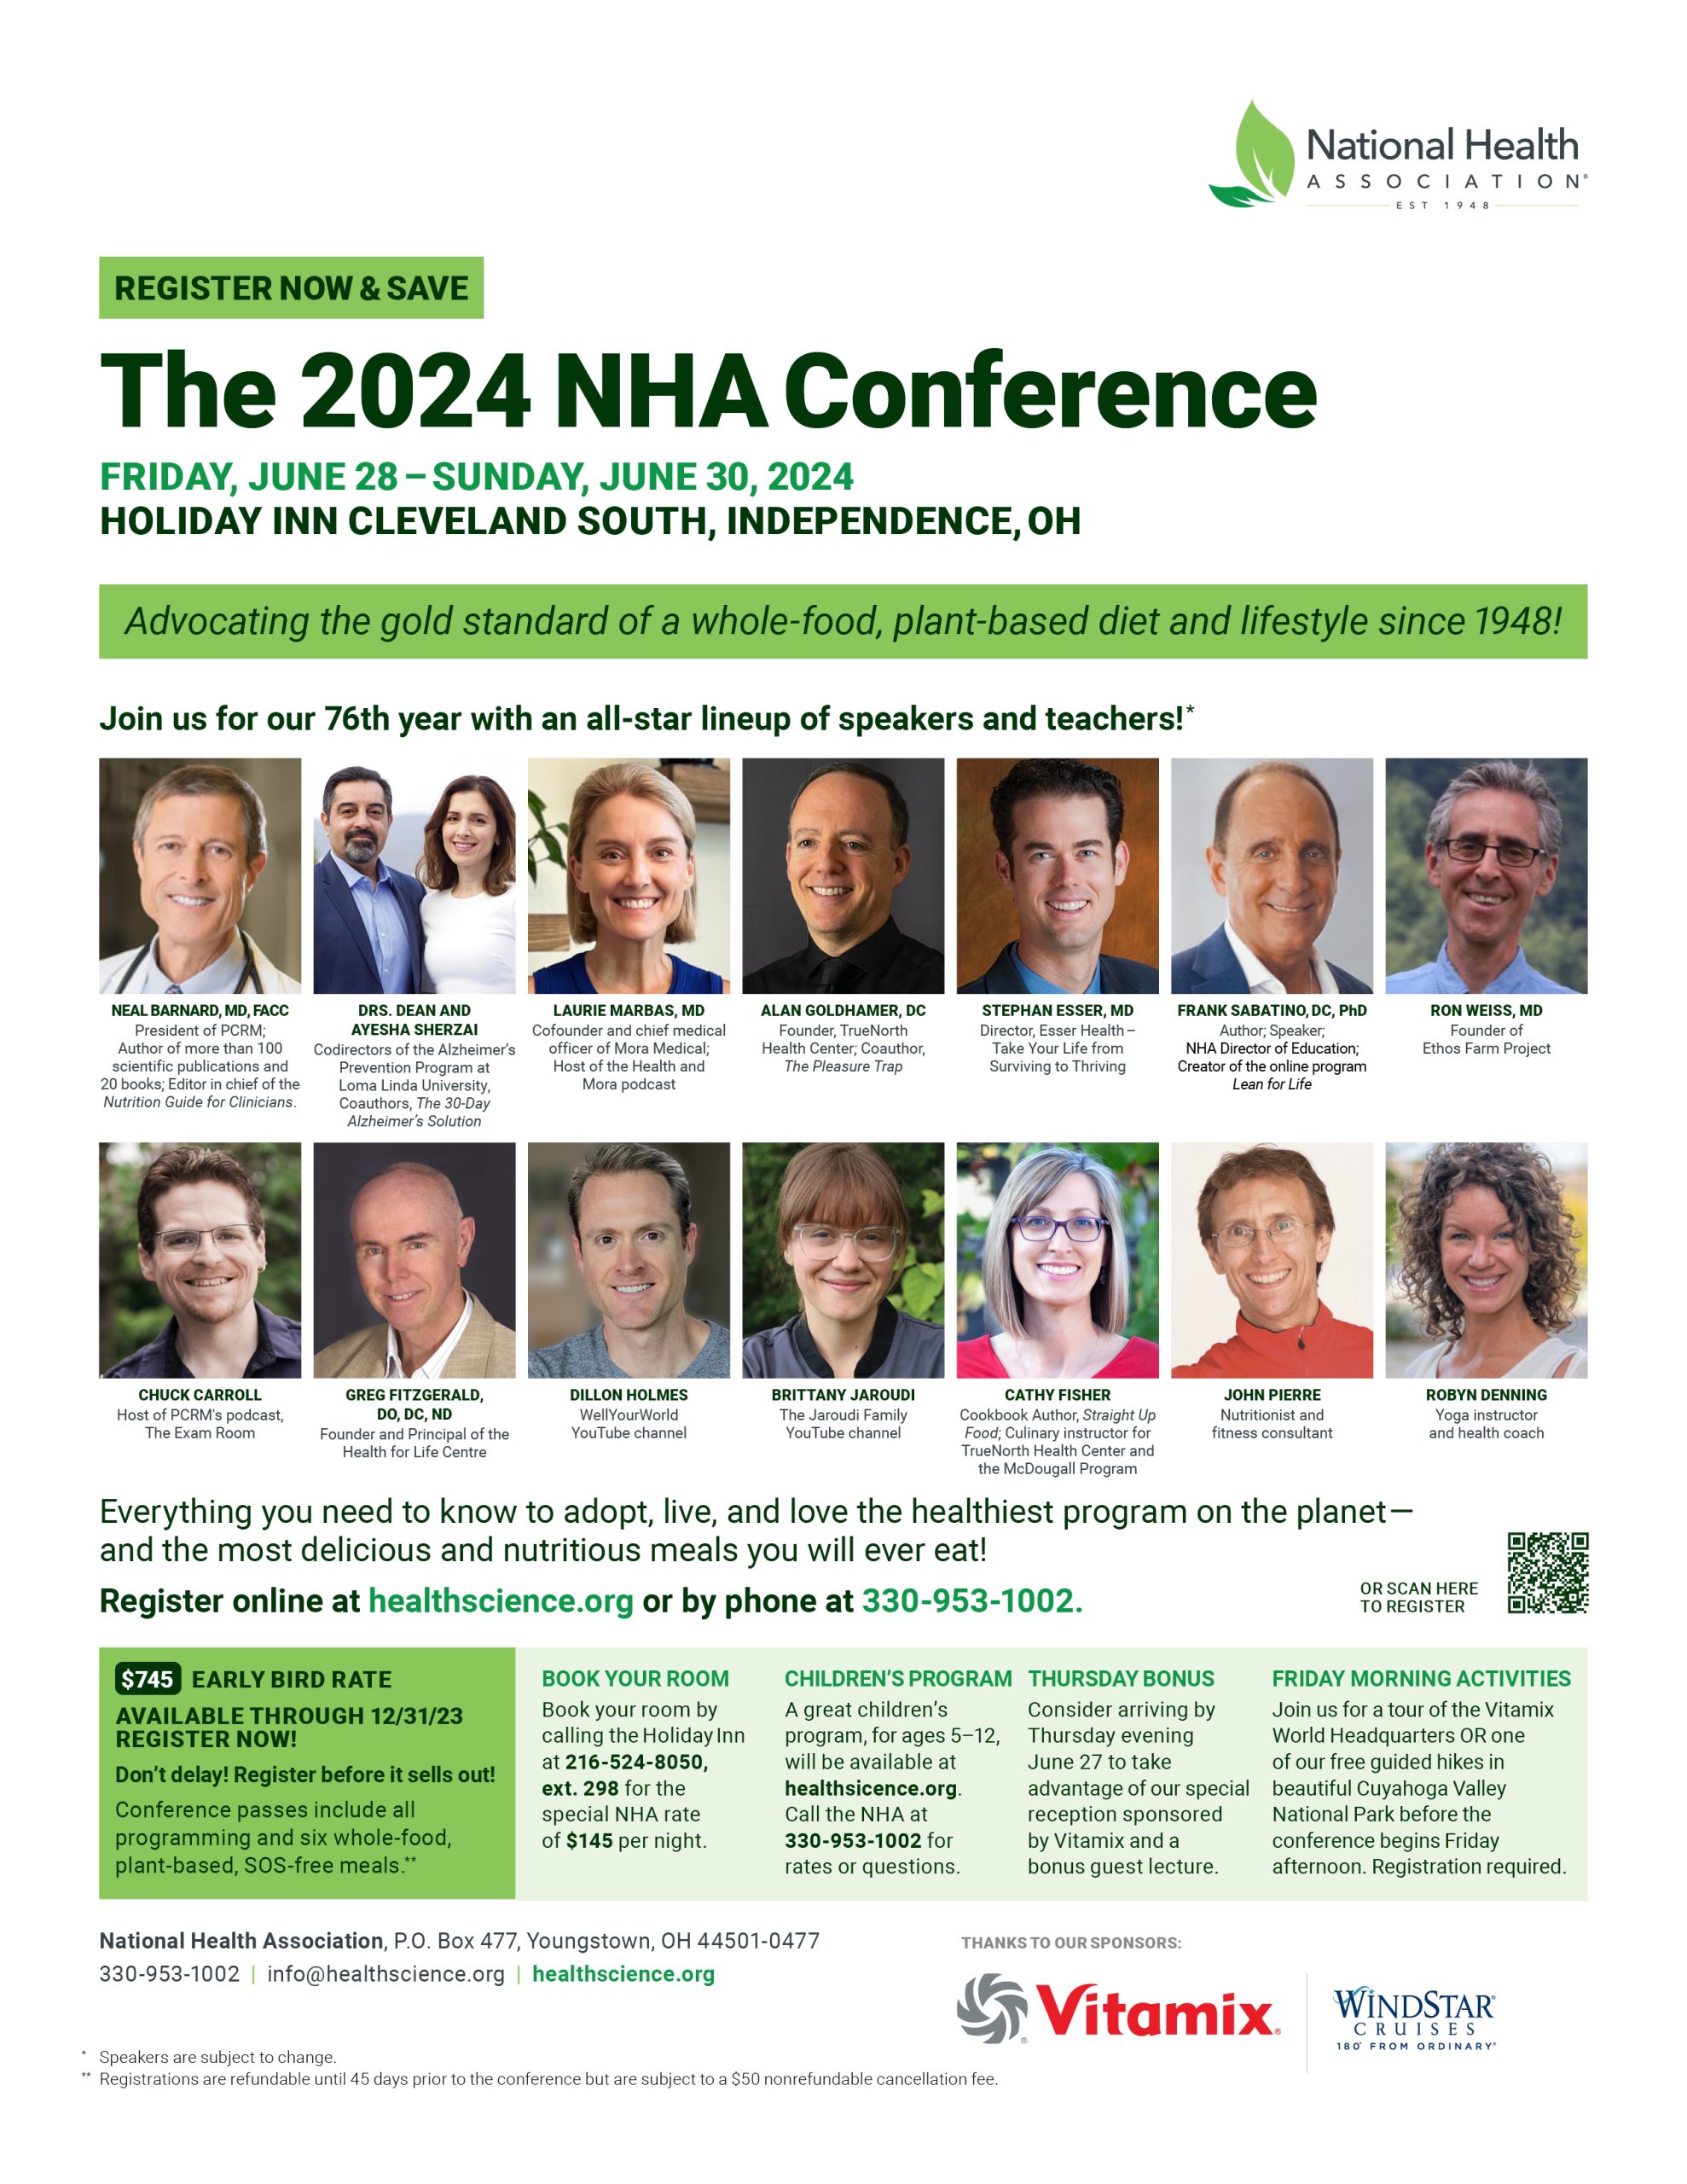 2024 NHA Conference National Health Association